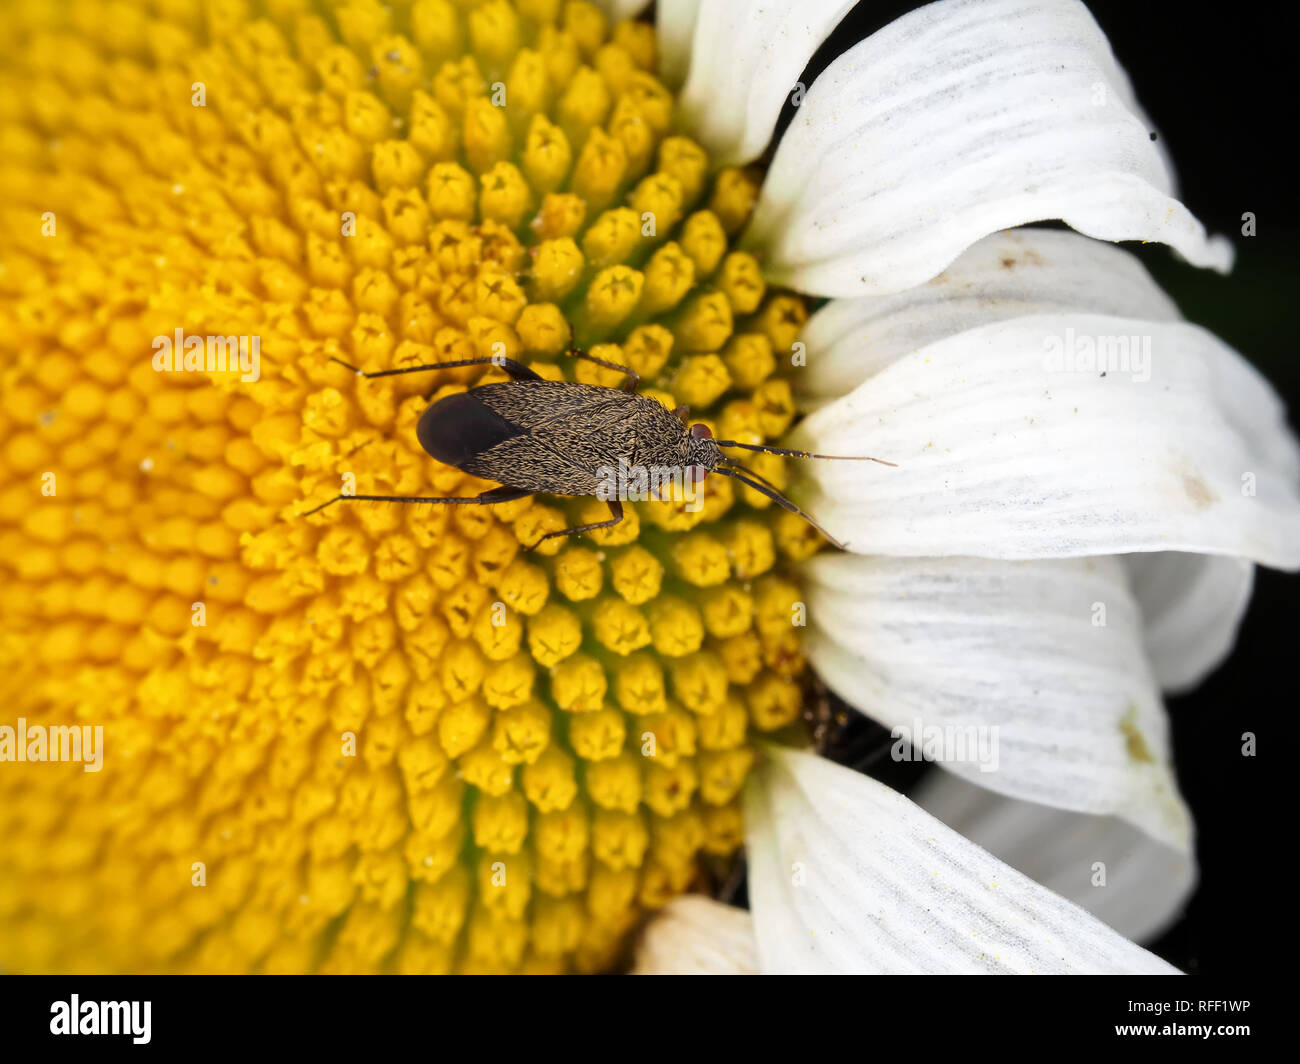 Plant bug (Miridae), possibly Irbisia sp. on a flower Stock Photo